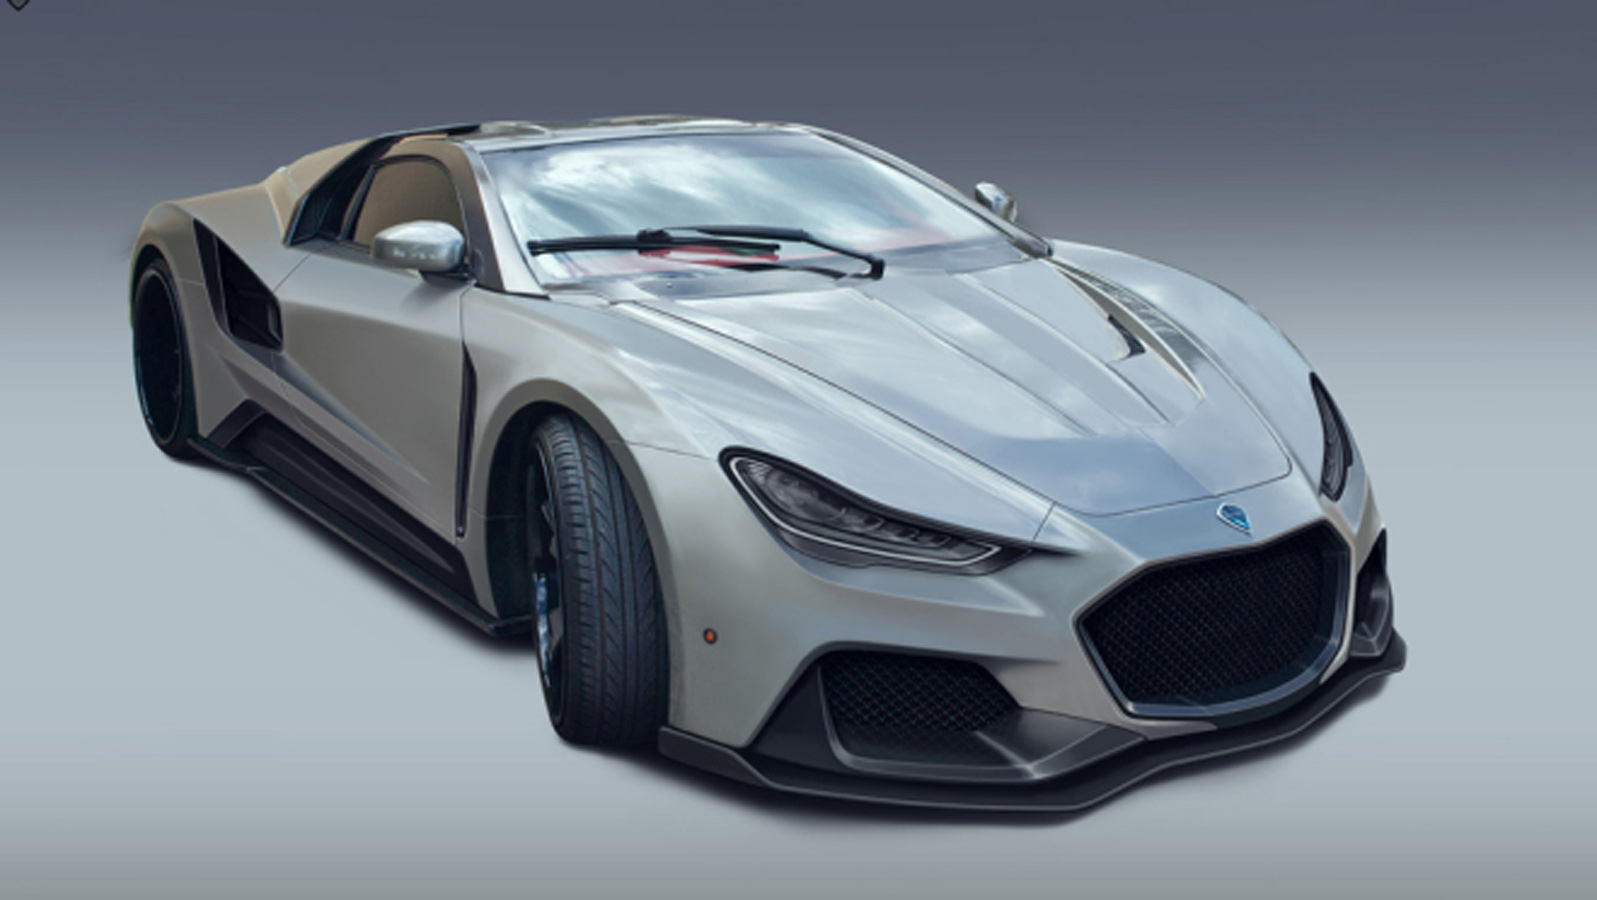 777 HP Mid-Engine Volant Supercar Based on G35 Coupe